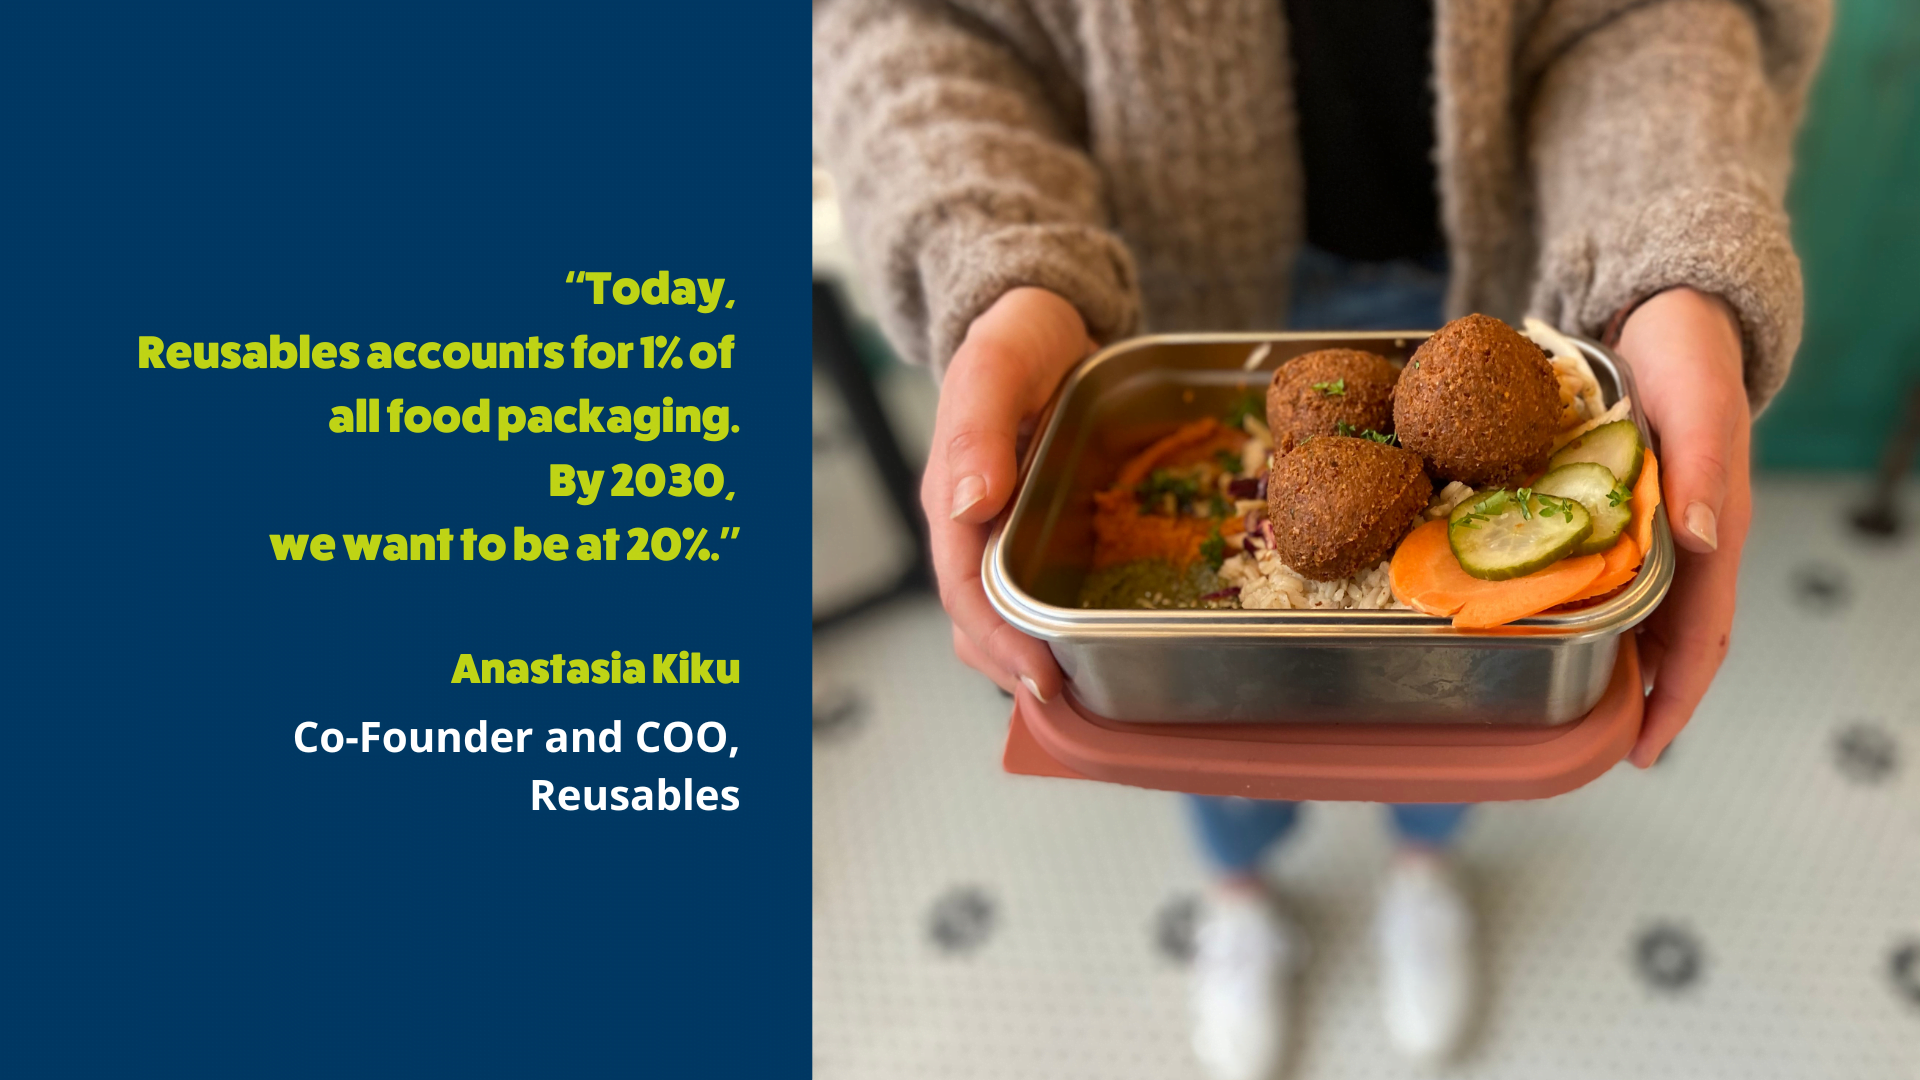 The right side of the creative has a photo of a person holding a reusables box with food in it. The left half of the creative is a blue band with a quote by Anastasia Kiku in green color that reads Today, Reusables accounts for one percent of all food packaging; by 2030, we want to be at twenty percent.